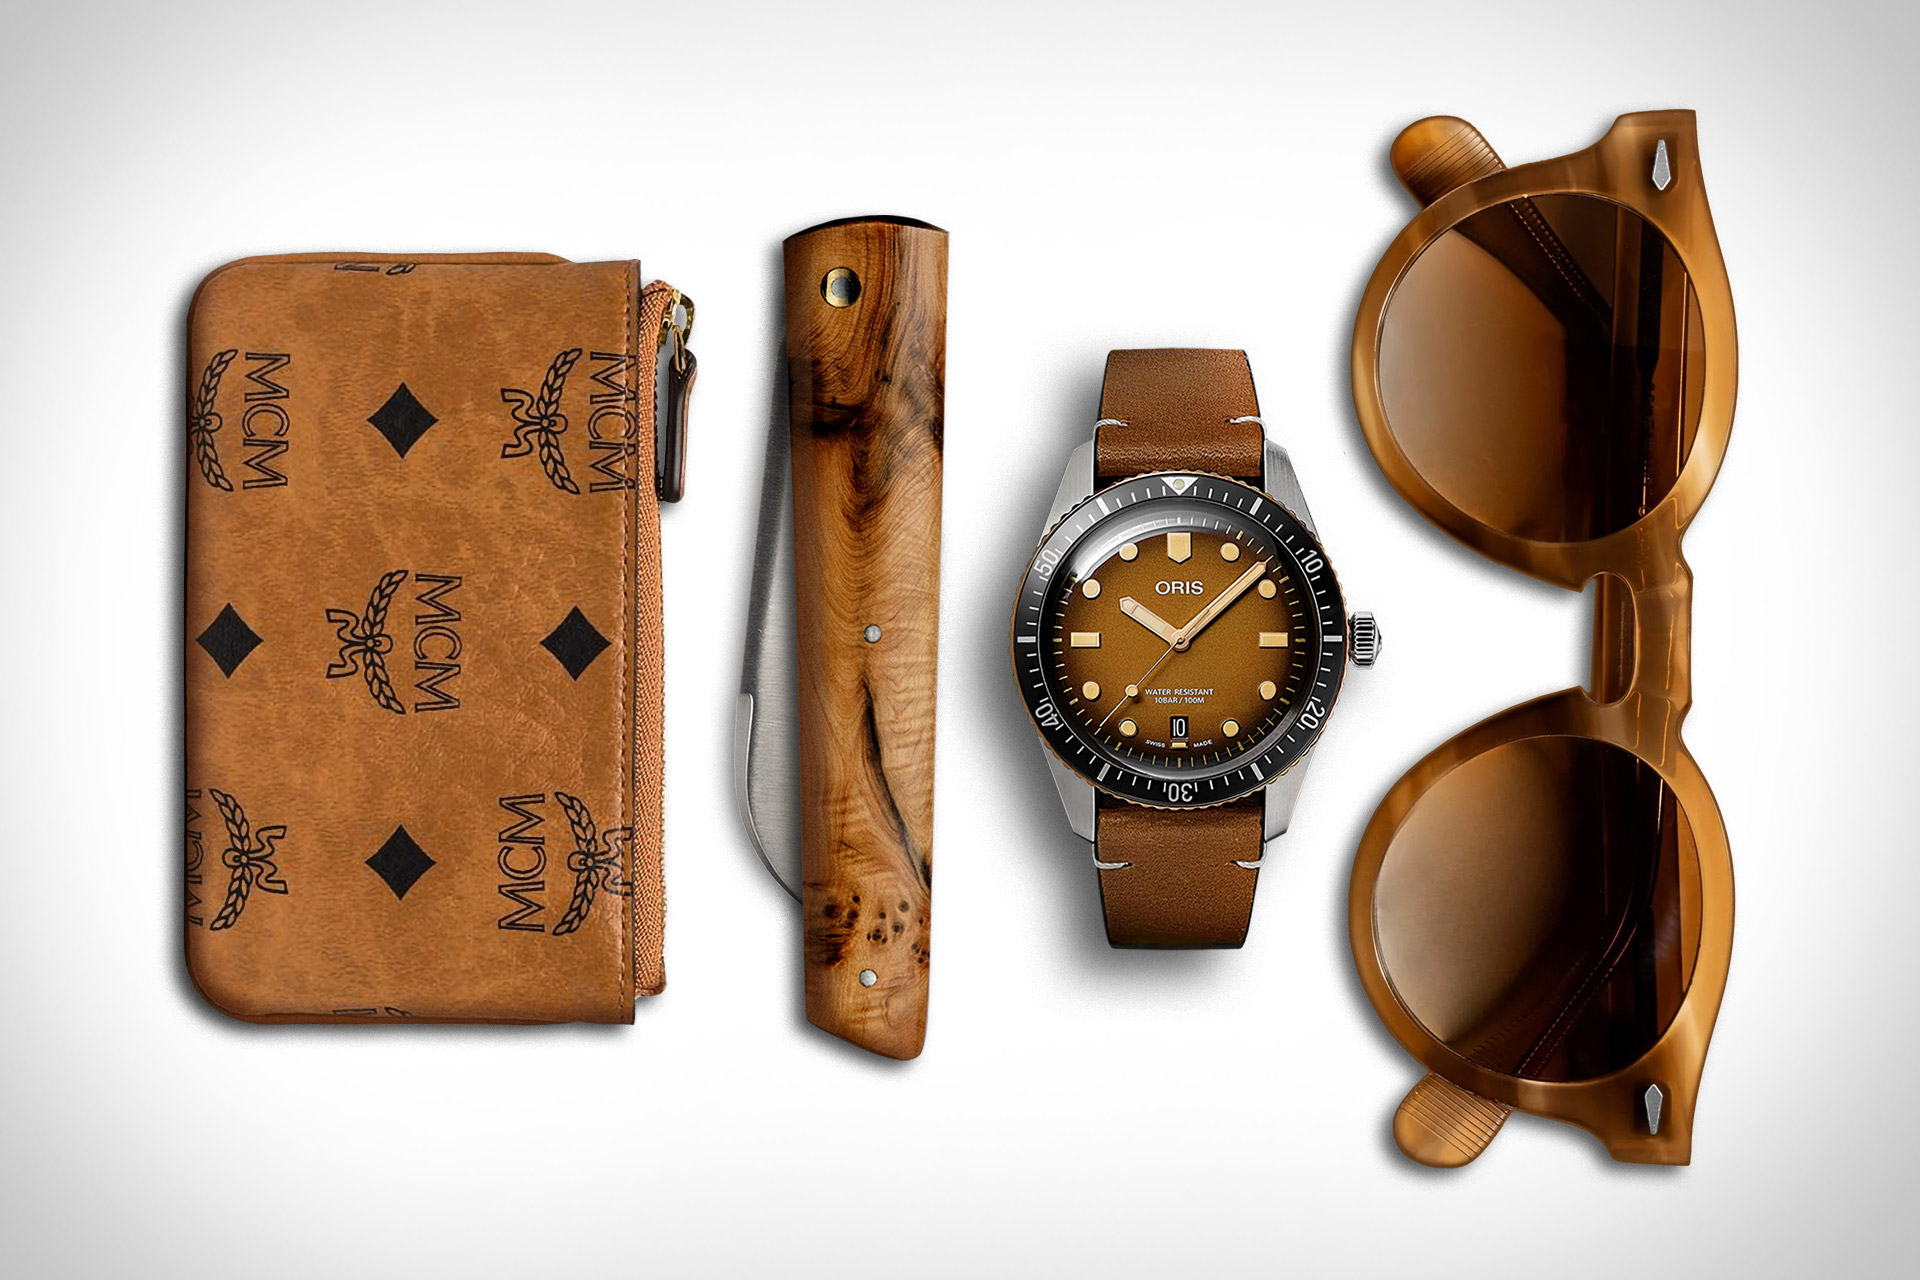 Everyday Carry: Toffee | Uncrate, #Everyday #Carry #Toffee #Uncrate